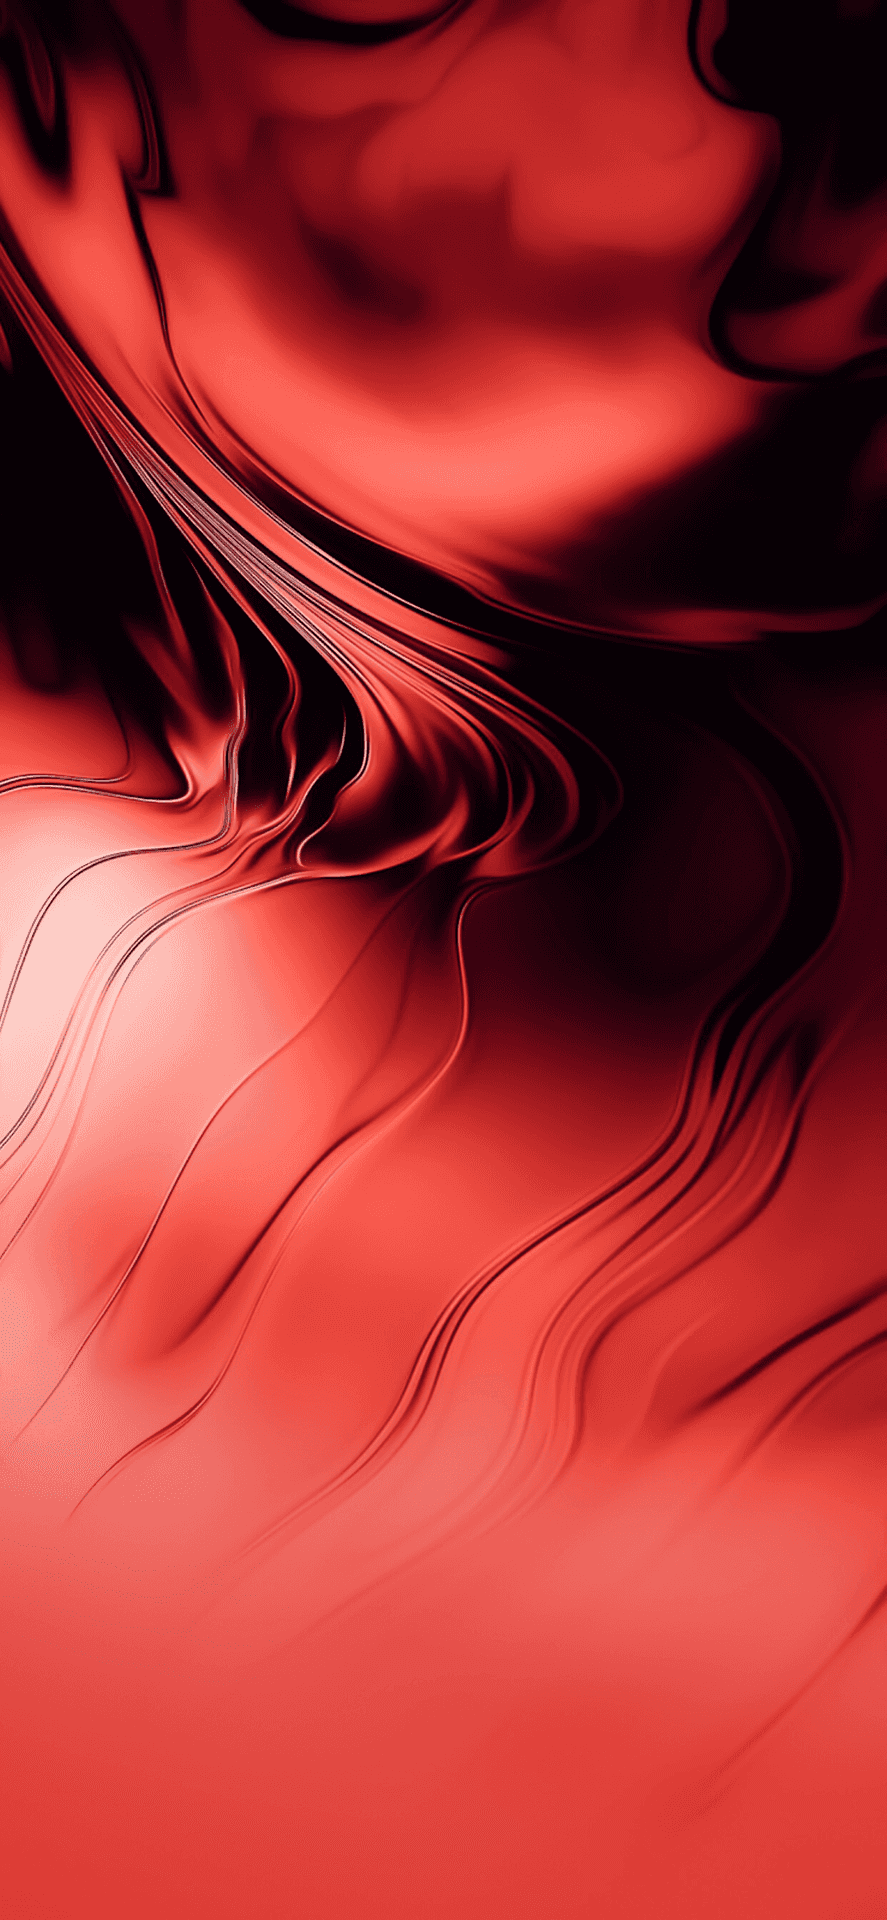 A Red Abstract Background With Waves